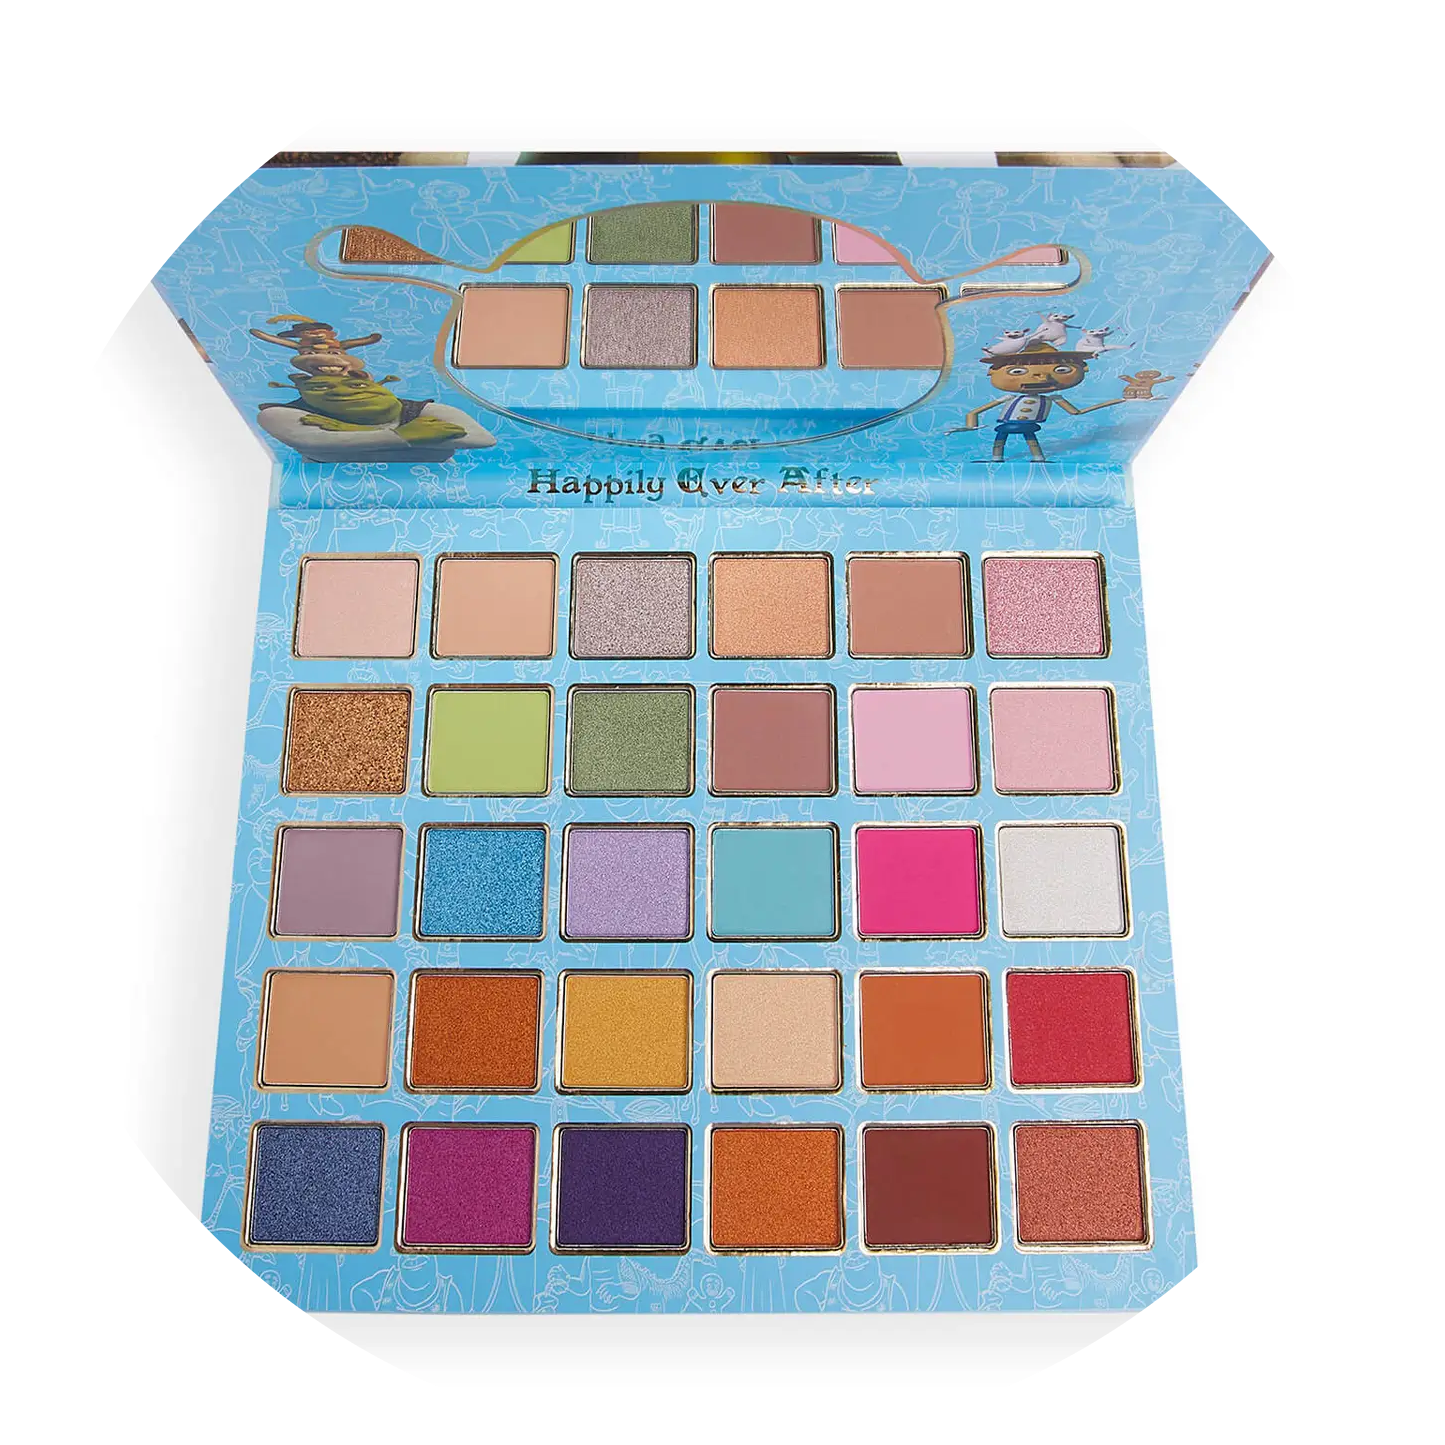 Shrek x I Heart Revolution Happily Ever After Shadow Palette NudeFace Chile